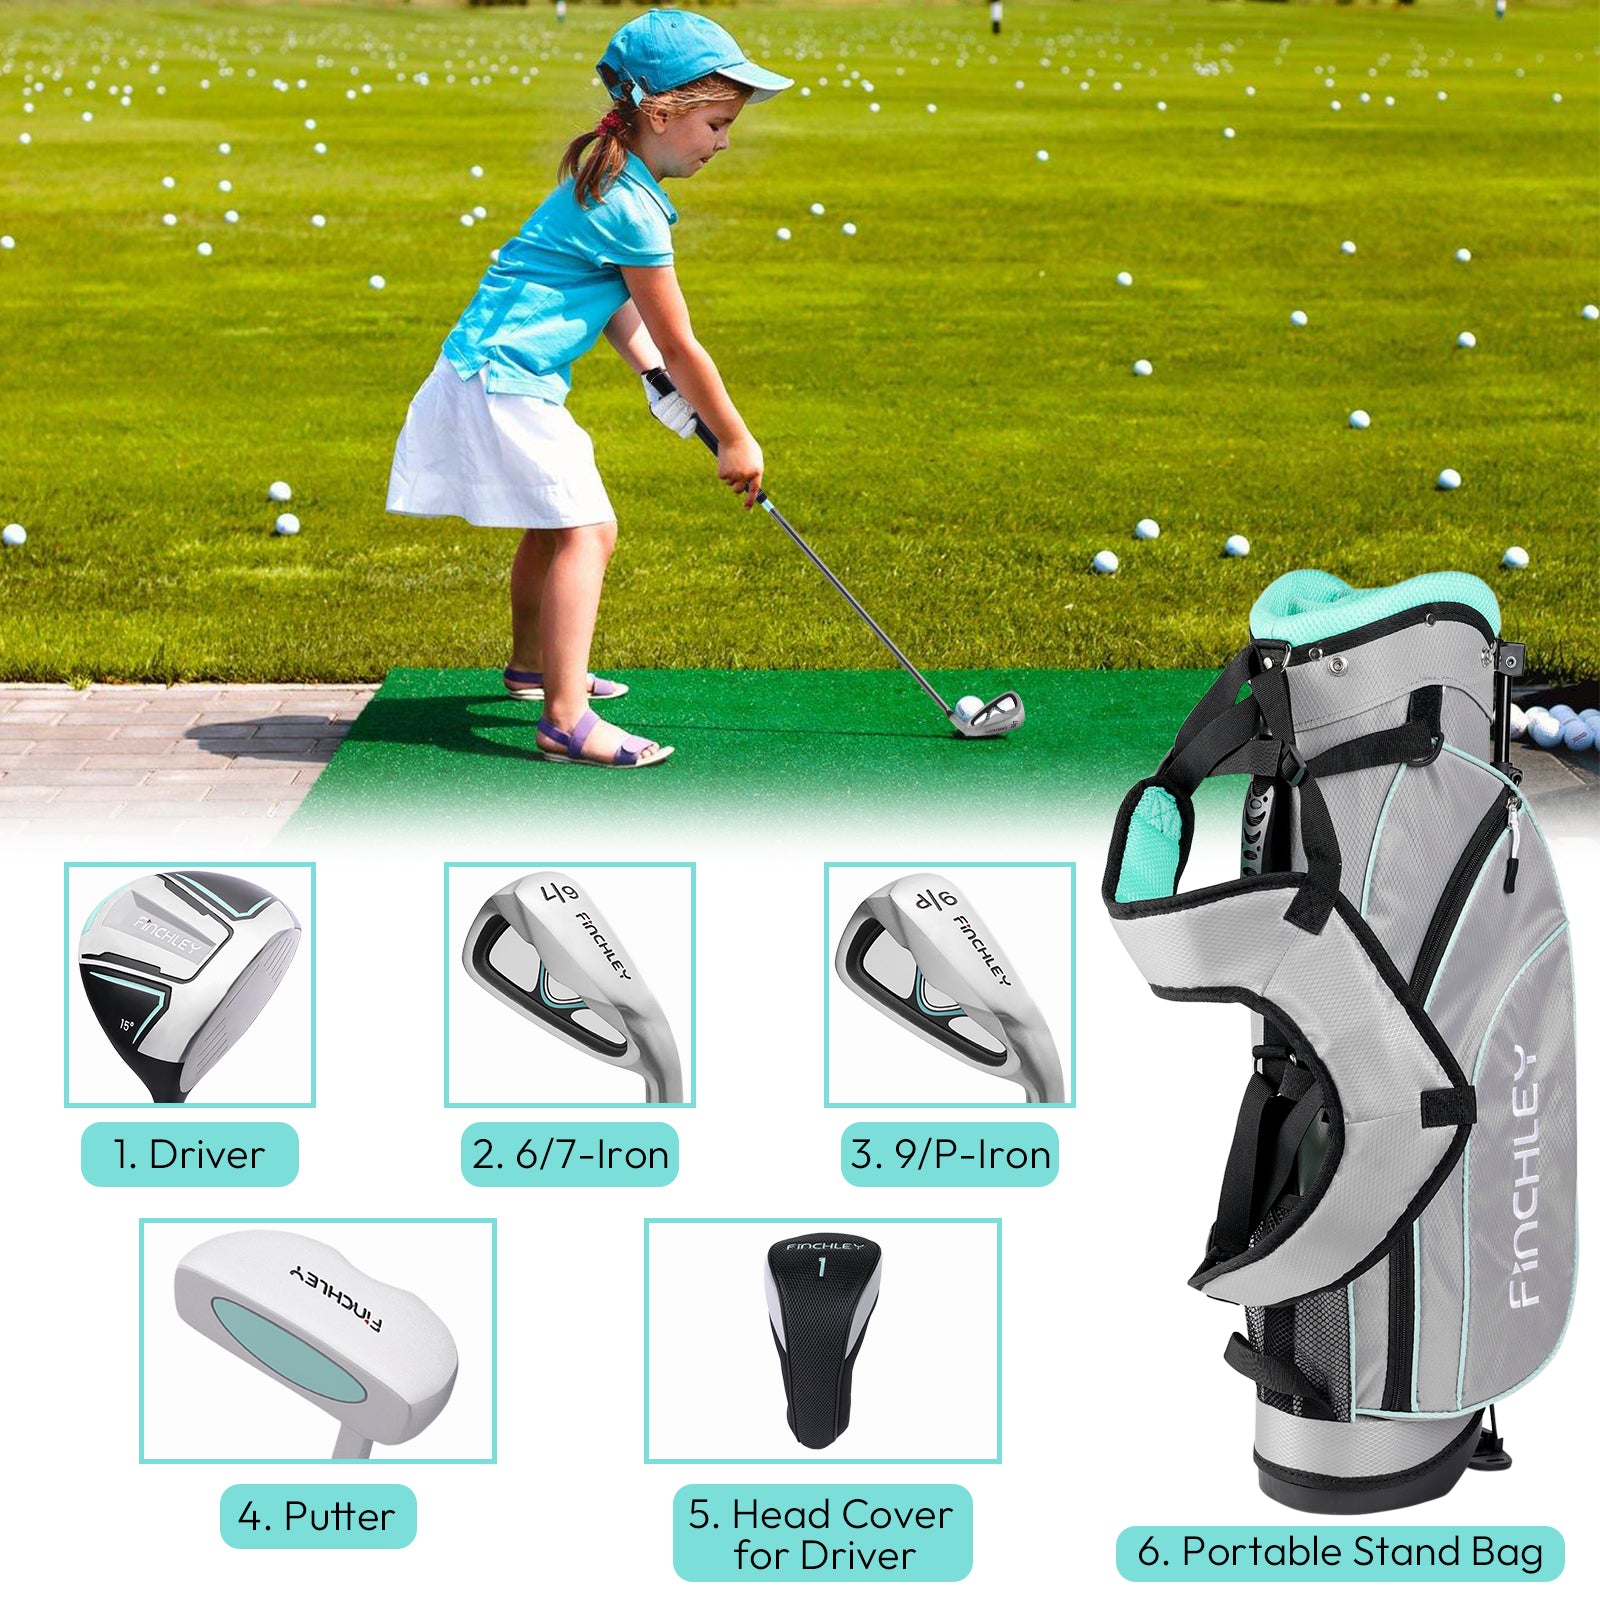 FINCHLEY Right-Handed 4-Piece Kids' Golf Set  (4-7 Years Old)